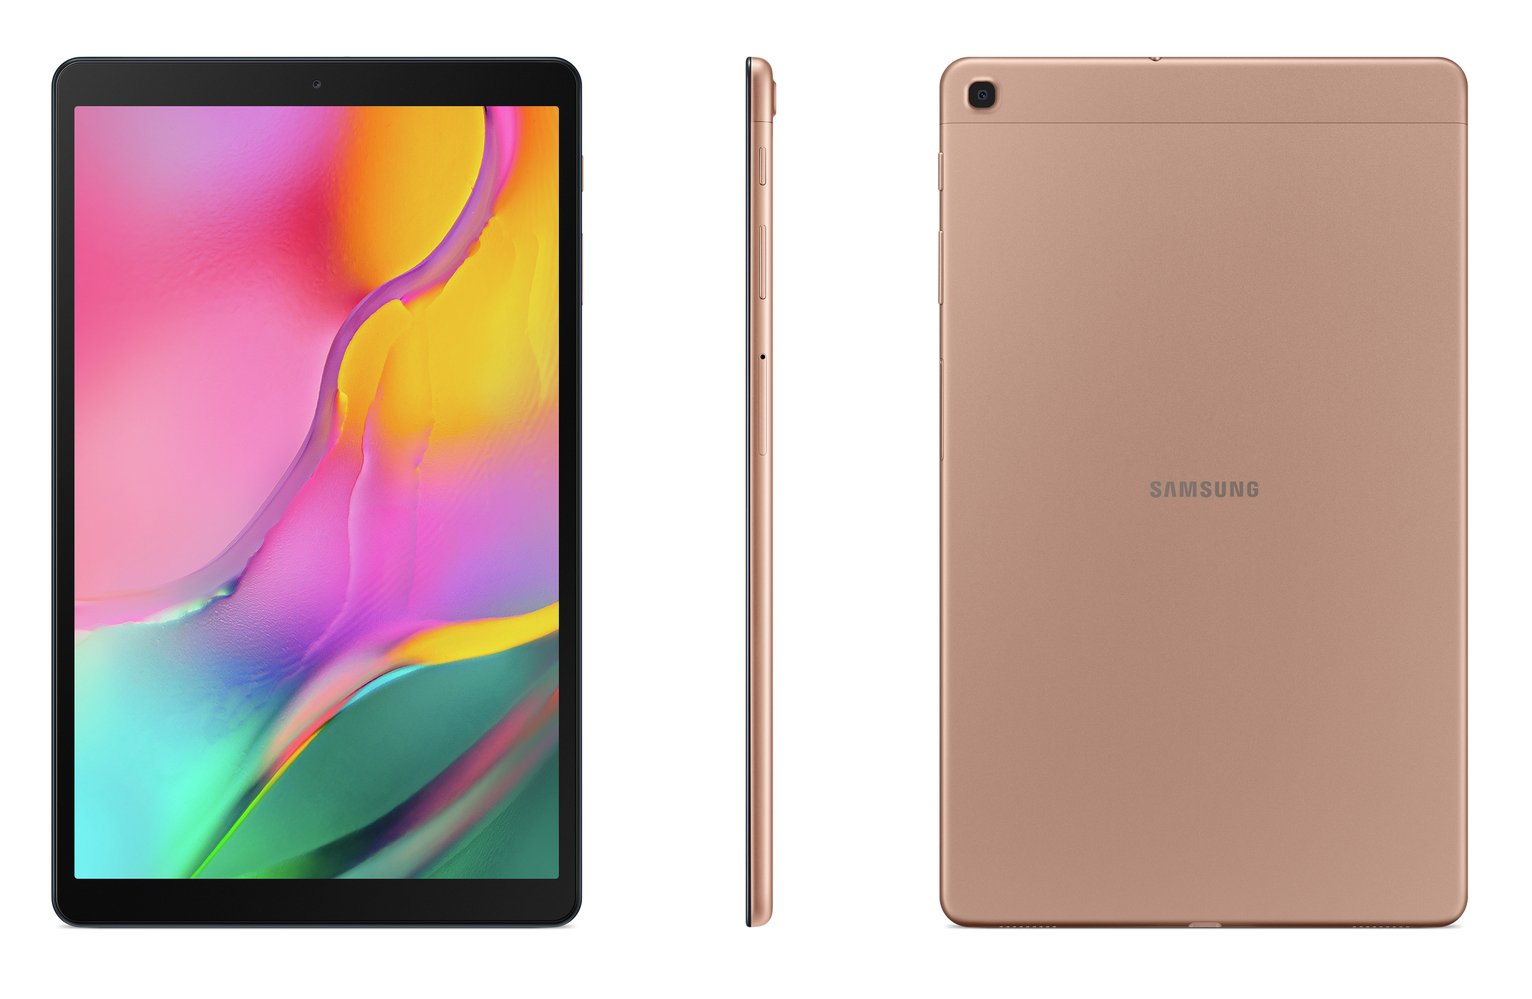 Samsung Tab A 10.1in 32 GB Wi-Fi Cellular LTE Tablet Review